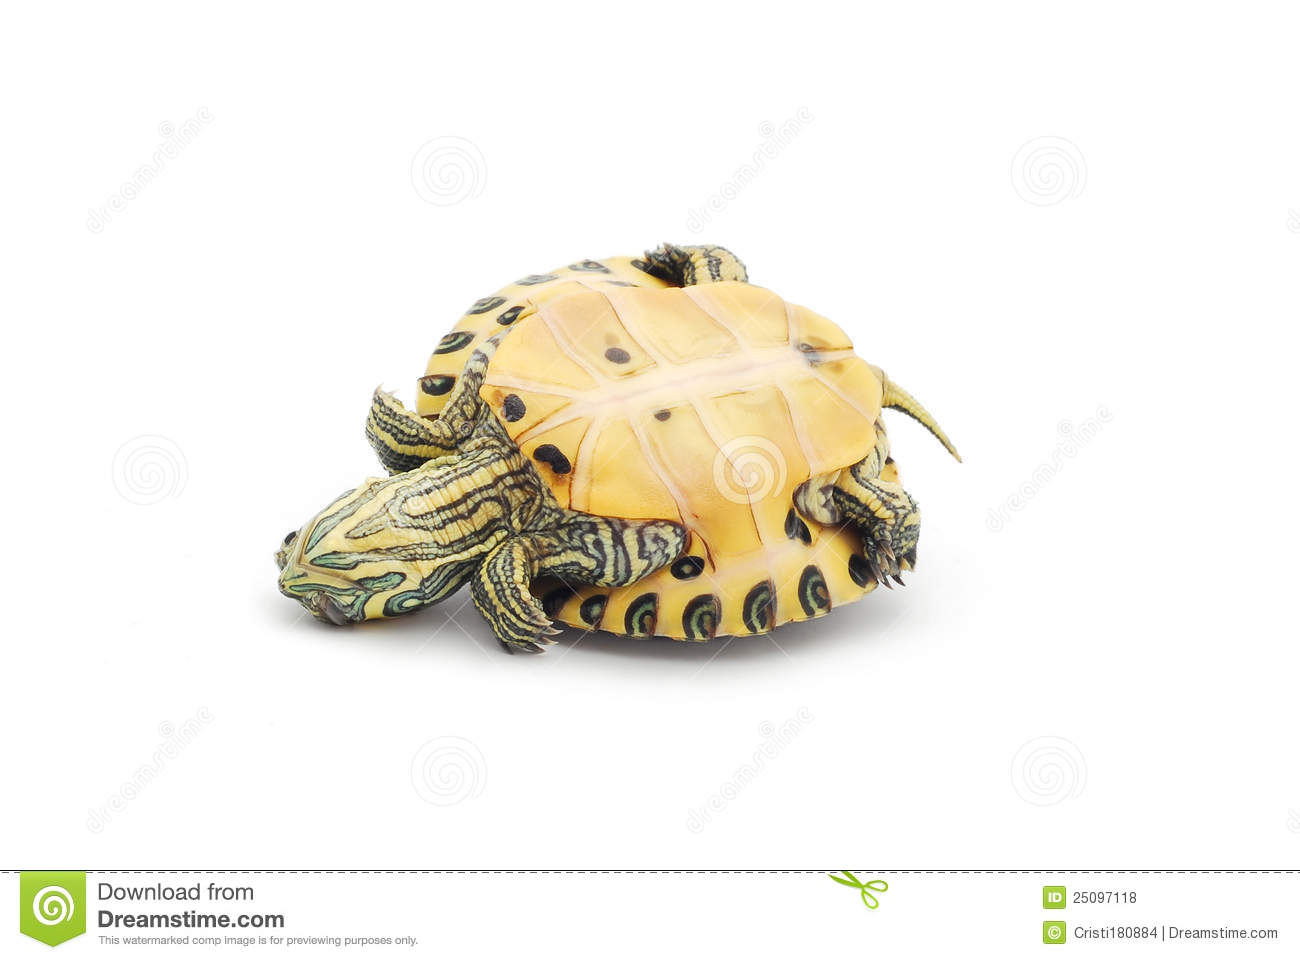 Upside Down Turtle Royalty Free Stock Photos   Image  25097118